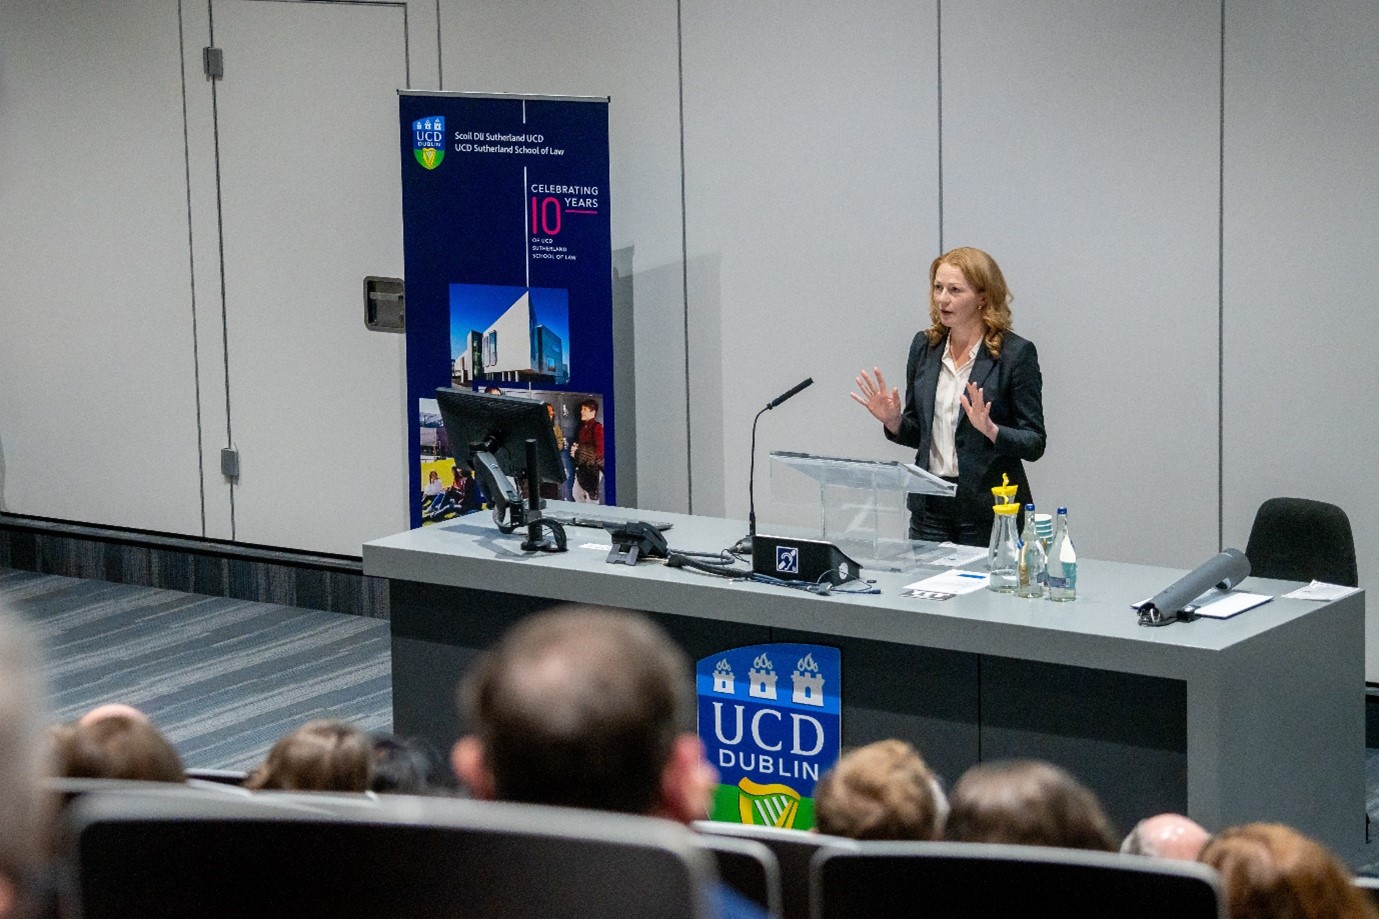 #InPictures: Judge Suzanne Kingston delivers landmark UCD lecture